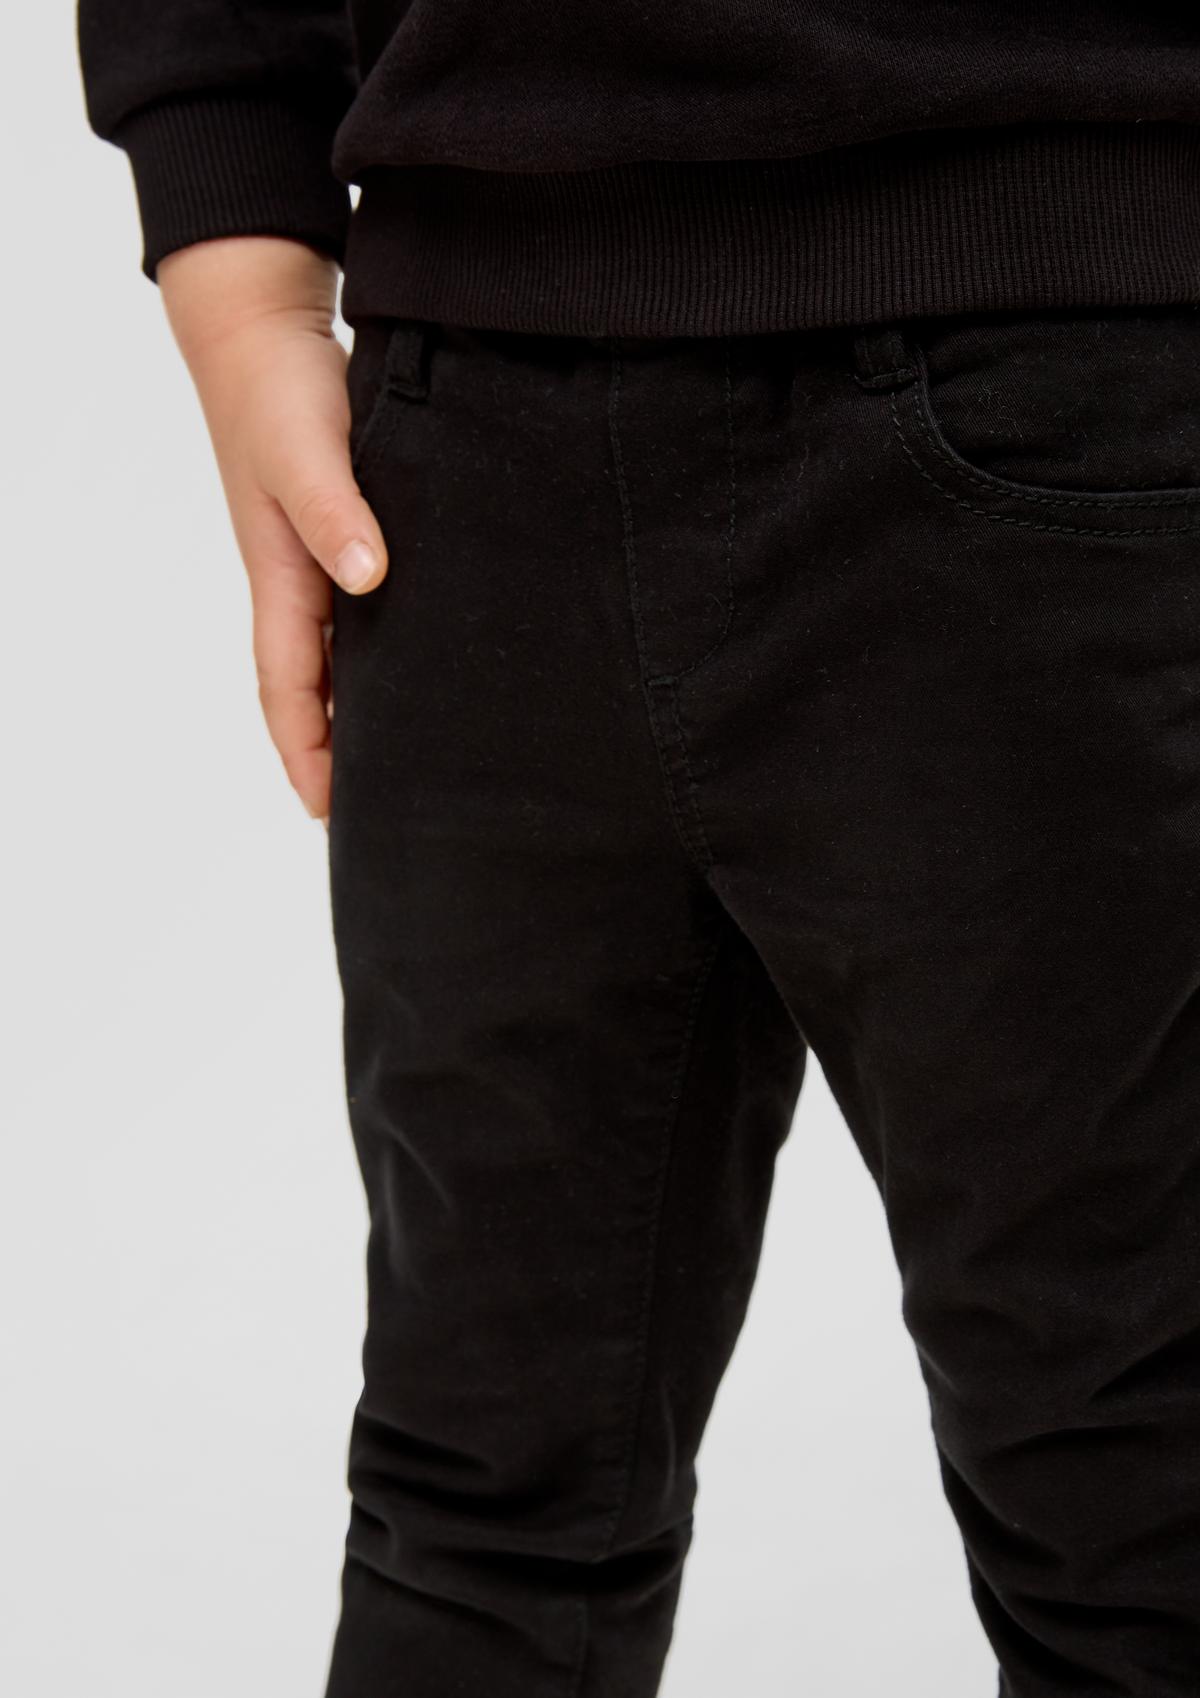 s.Oliver Pelle: Tracksuit bottoms-style twill trousers